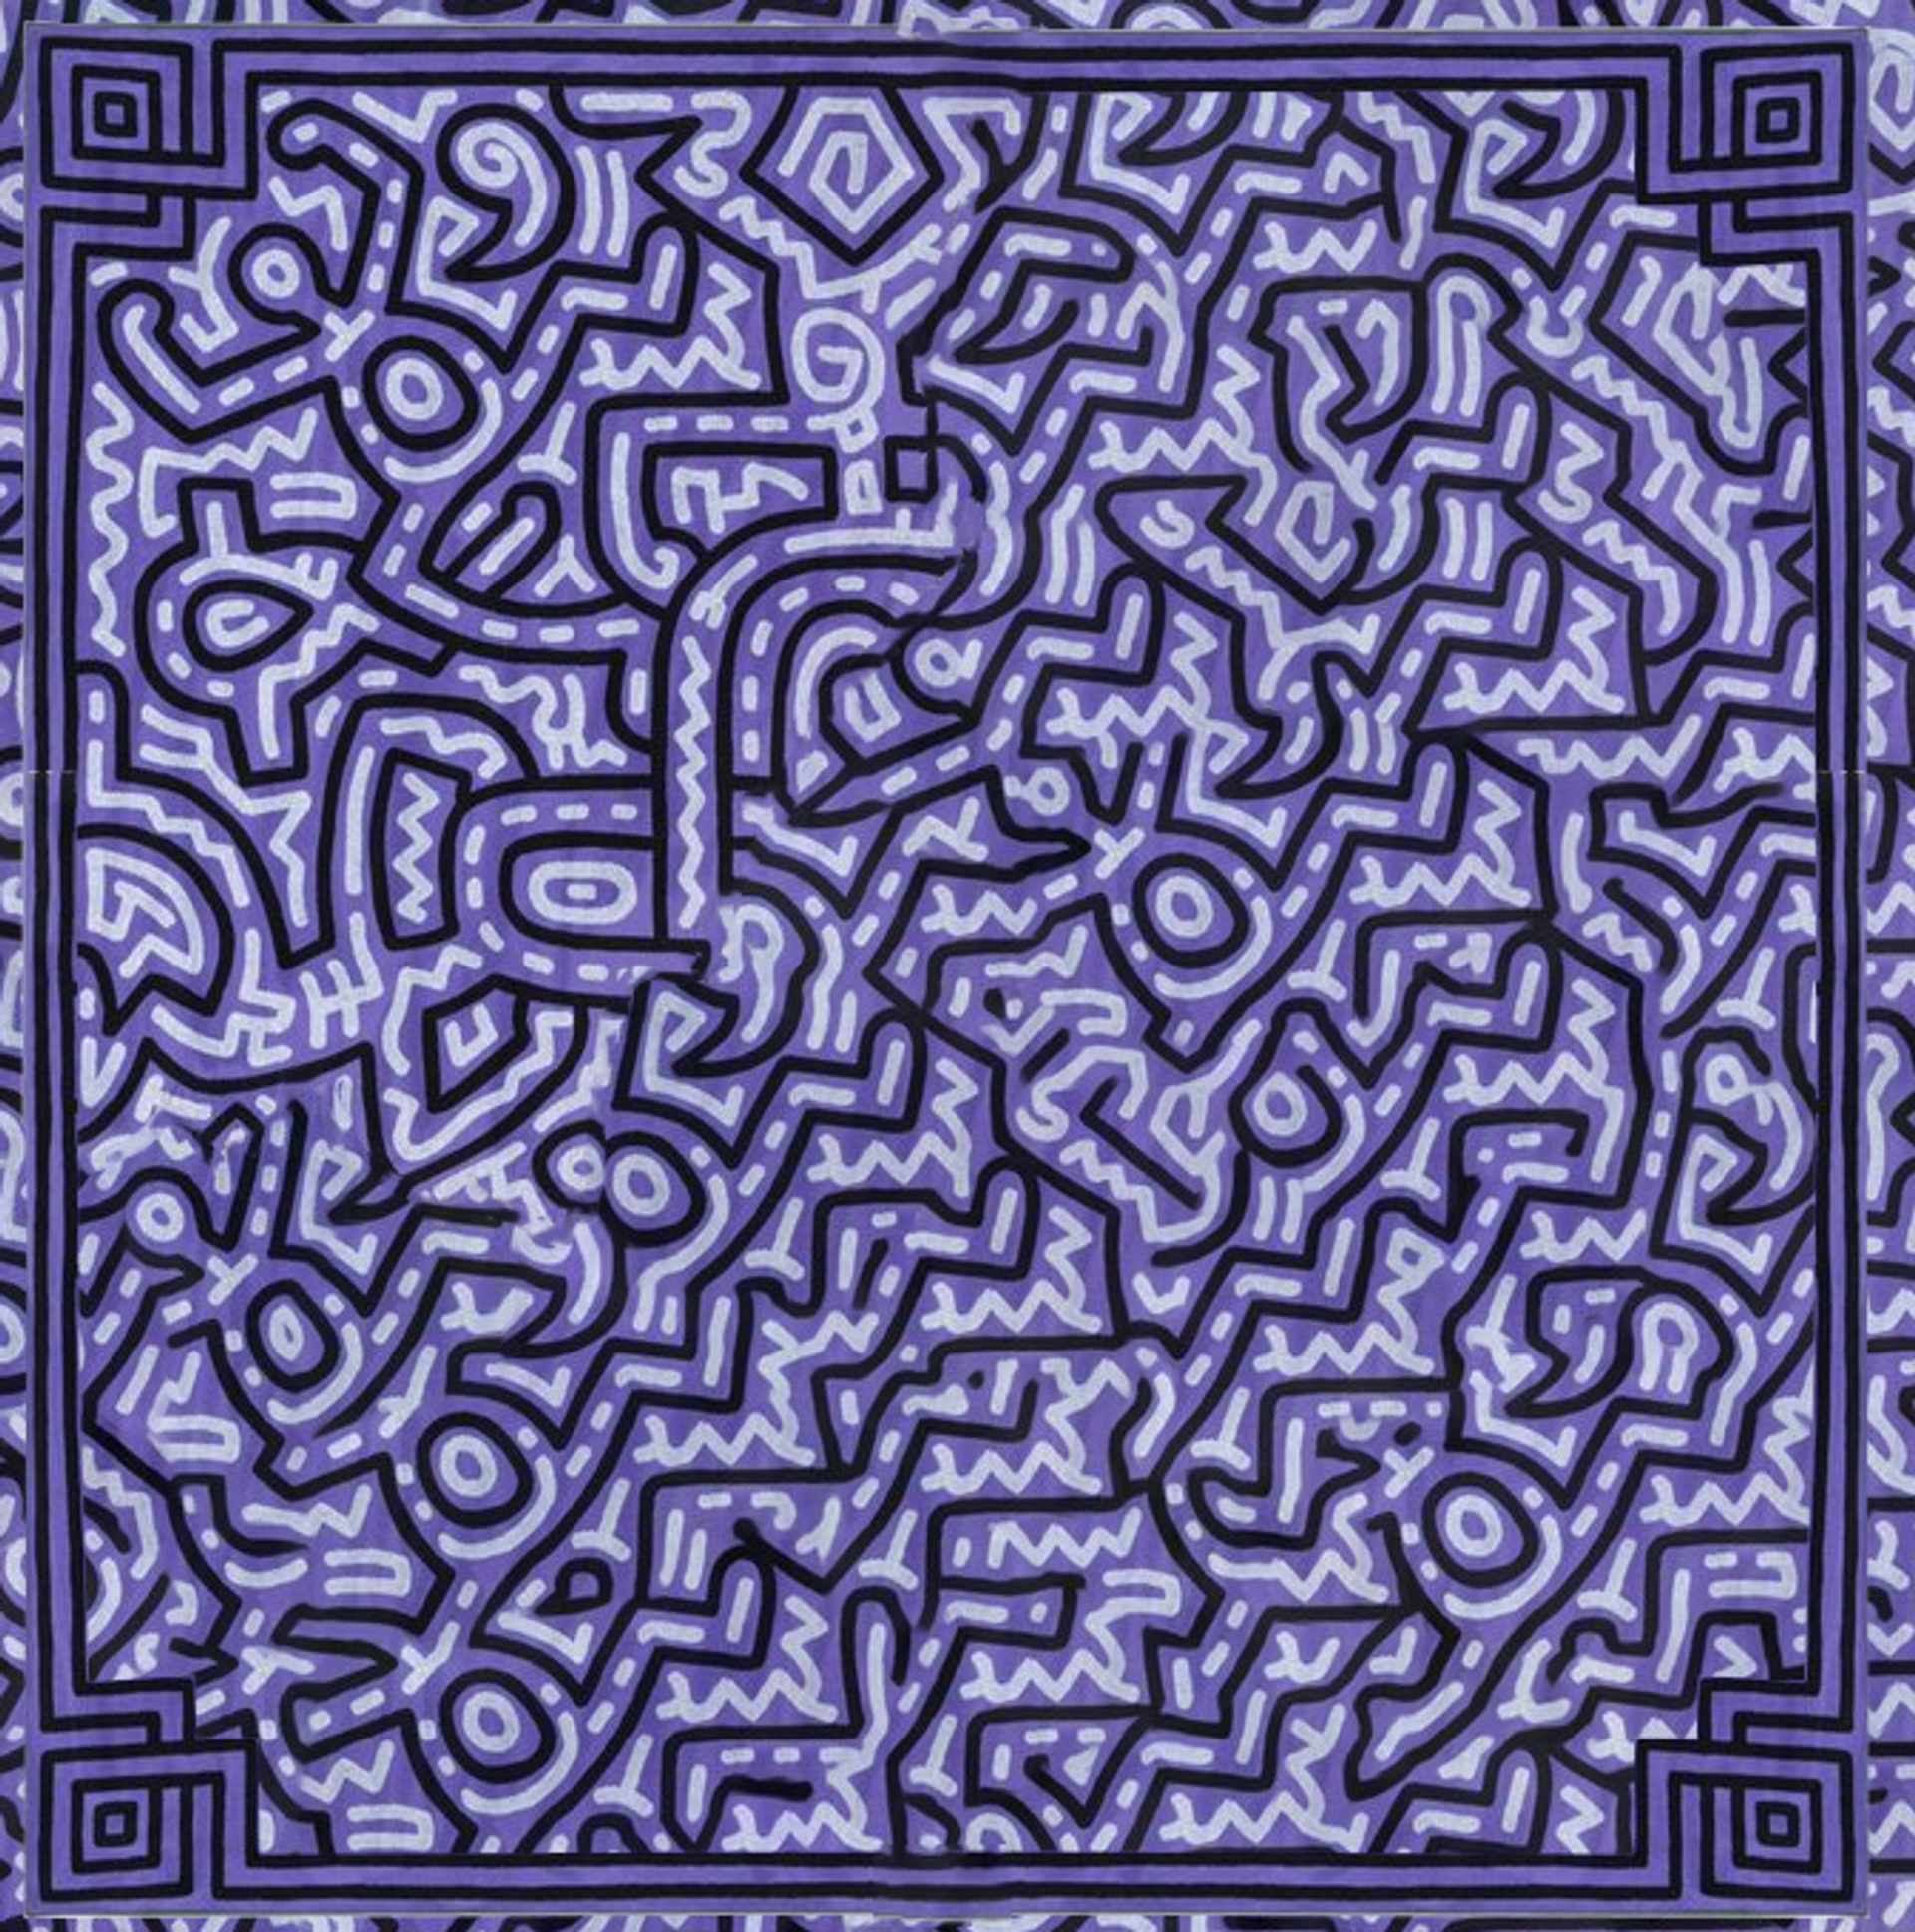 An AI-completed image of Keith Haring's Unfinished Painting, from 1989. Haring's signature motifs are shown against a purple background.